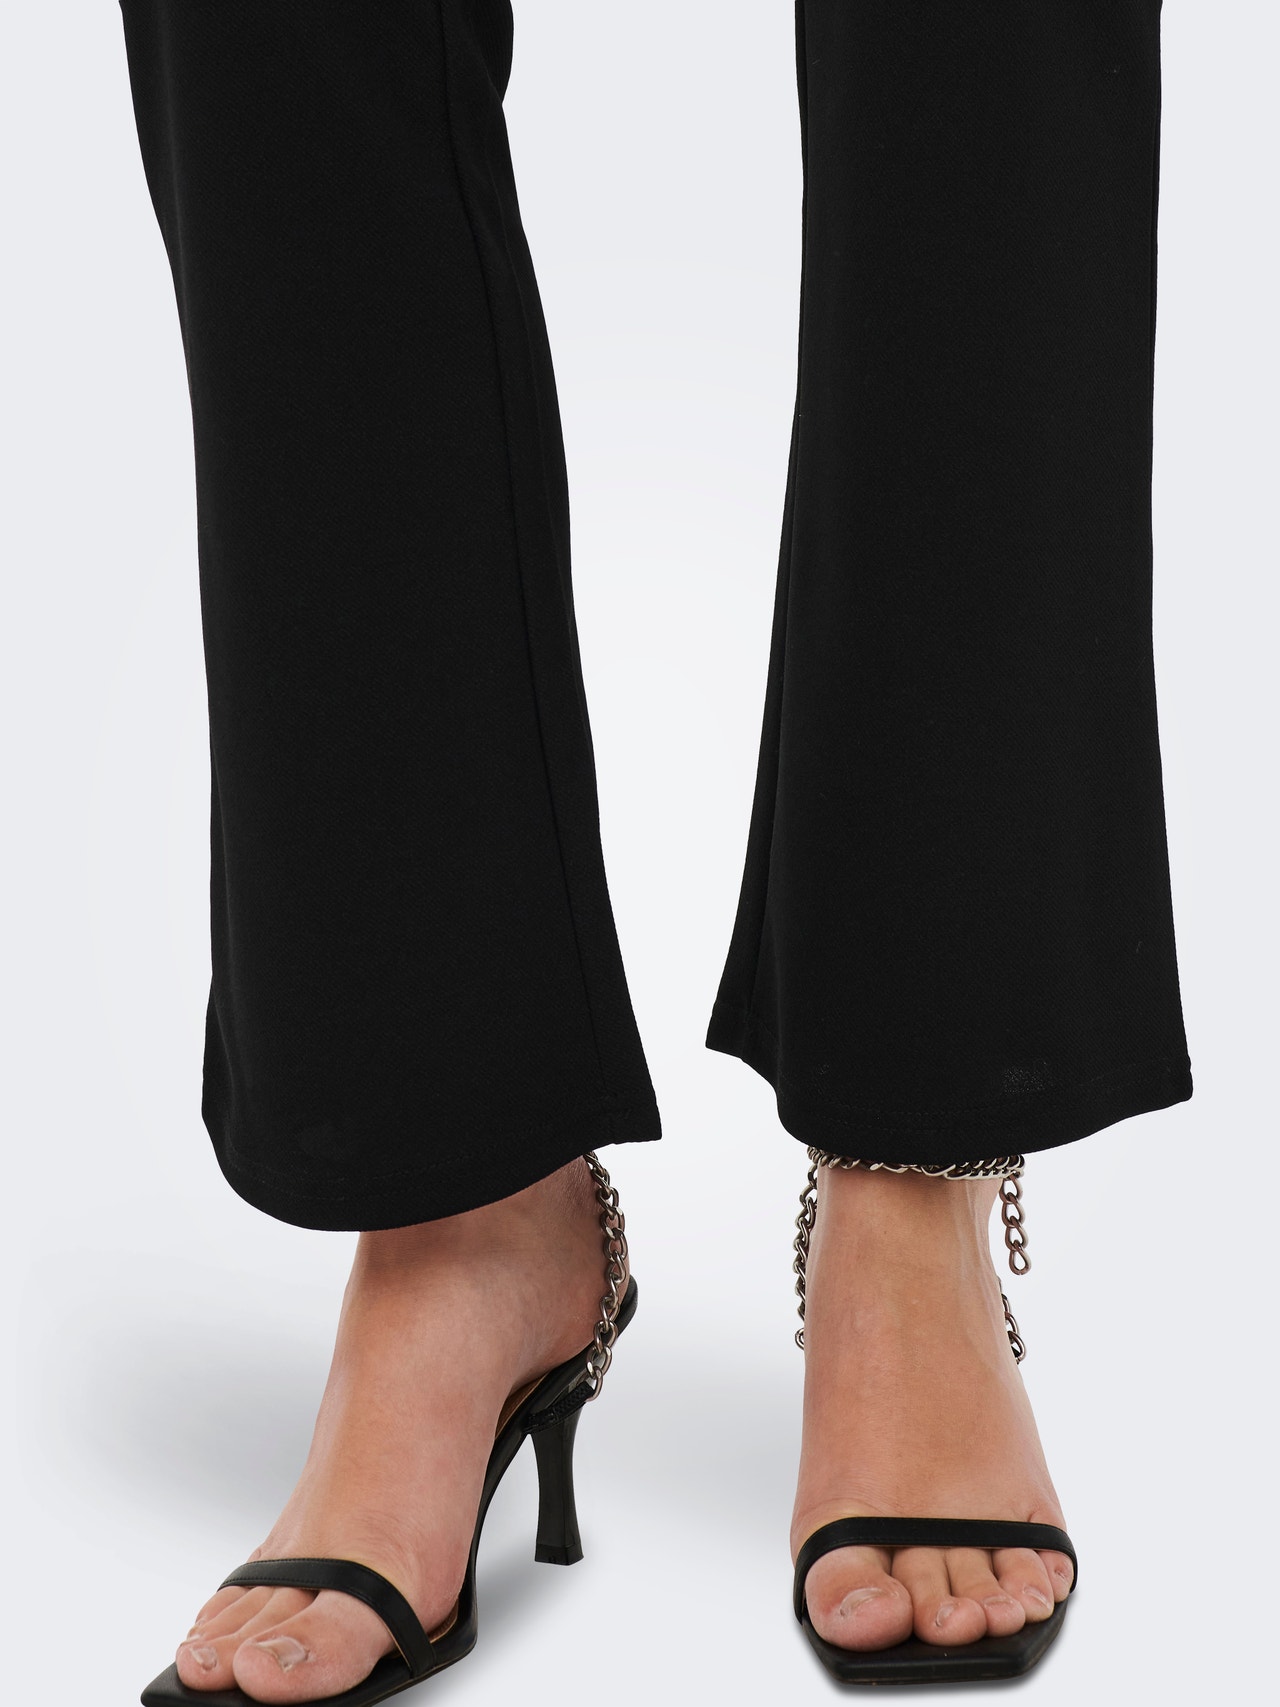 ONLY Pantalons Flared Fit -Black - 15277598